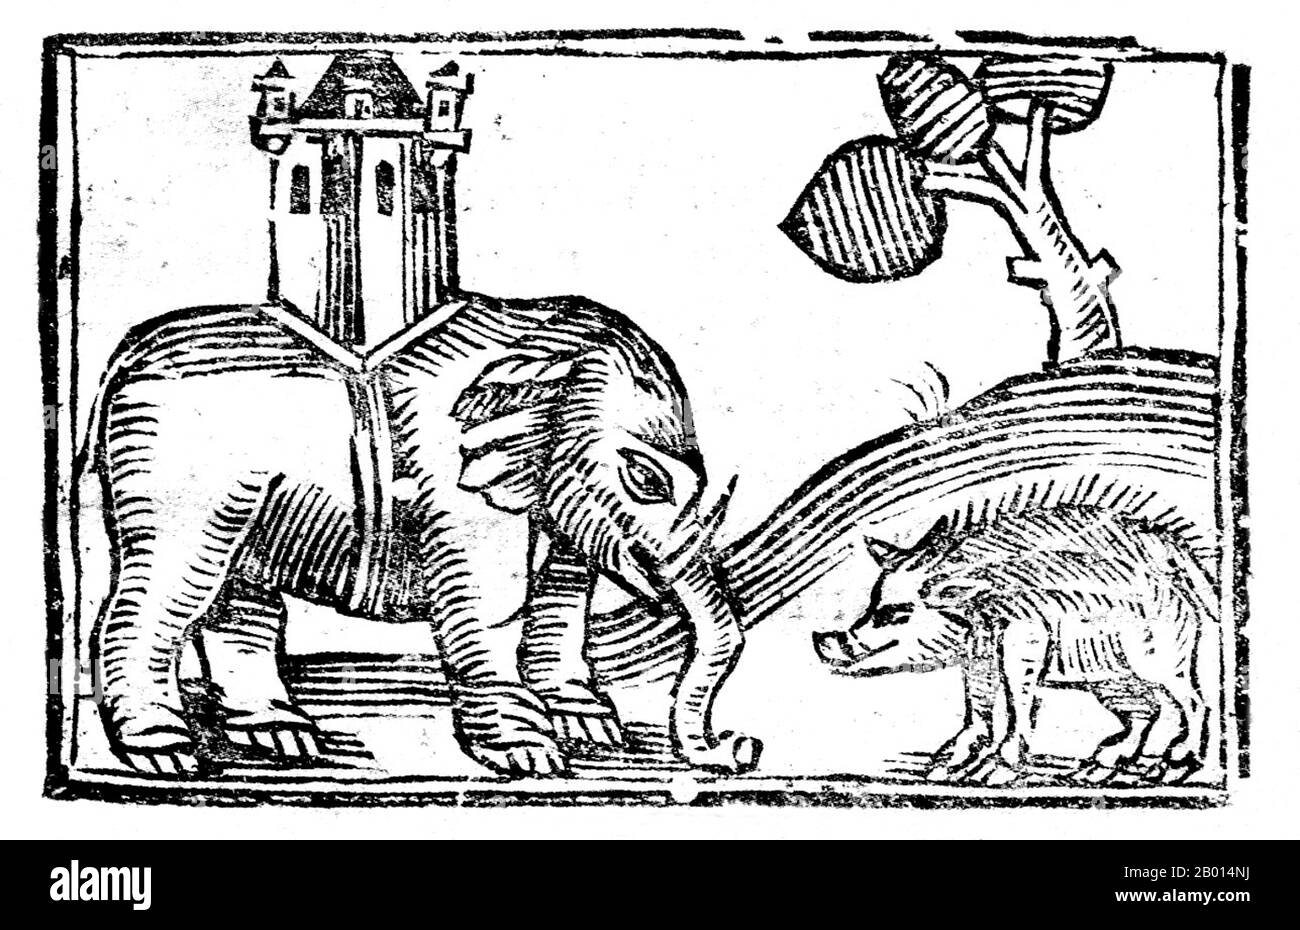 England: 'Elephant and Castle (with giant wild boar)'. Illustration from 'The Foreign Travels of John Mandeville', c. 1750.  'Jehan de Mandeville' (c. 1300-1372), translated as 'Sir John Mandeville', is the name claimed by the compiler of a singular book of supposed travels, written in Anglo-Norman French, and published between 1357 and 1371. By aid of translations into many other languages it acquired extraordinary popularity. Despite the extremely unreliable and often fantastical nature of the travels it describes, it was used as a work of reference by people such as Christopher Columbus. Stock Photo